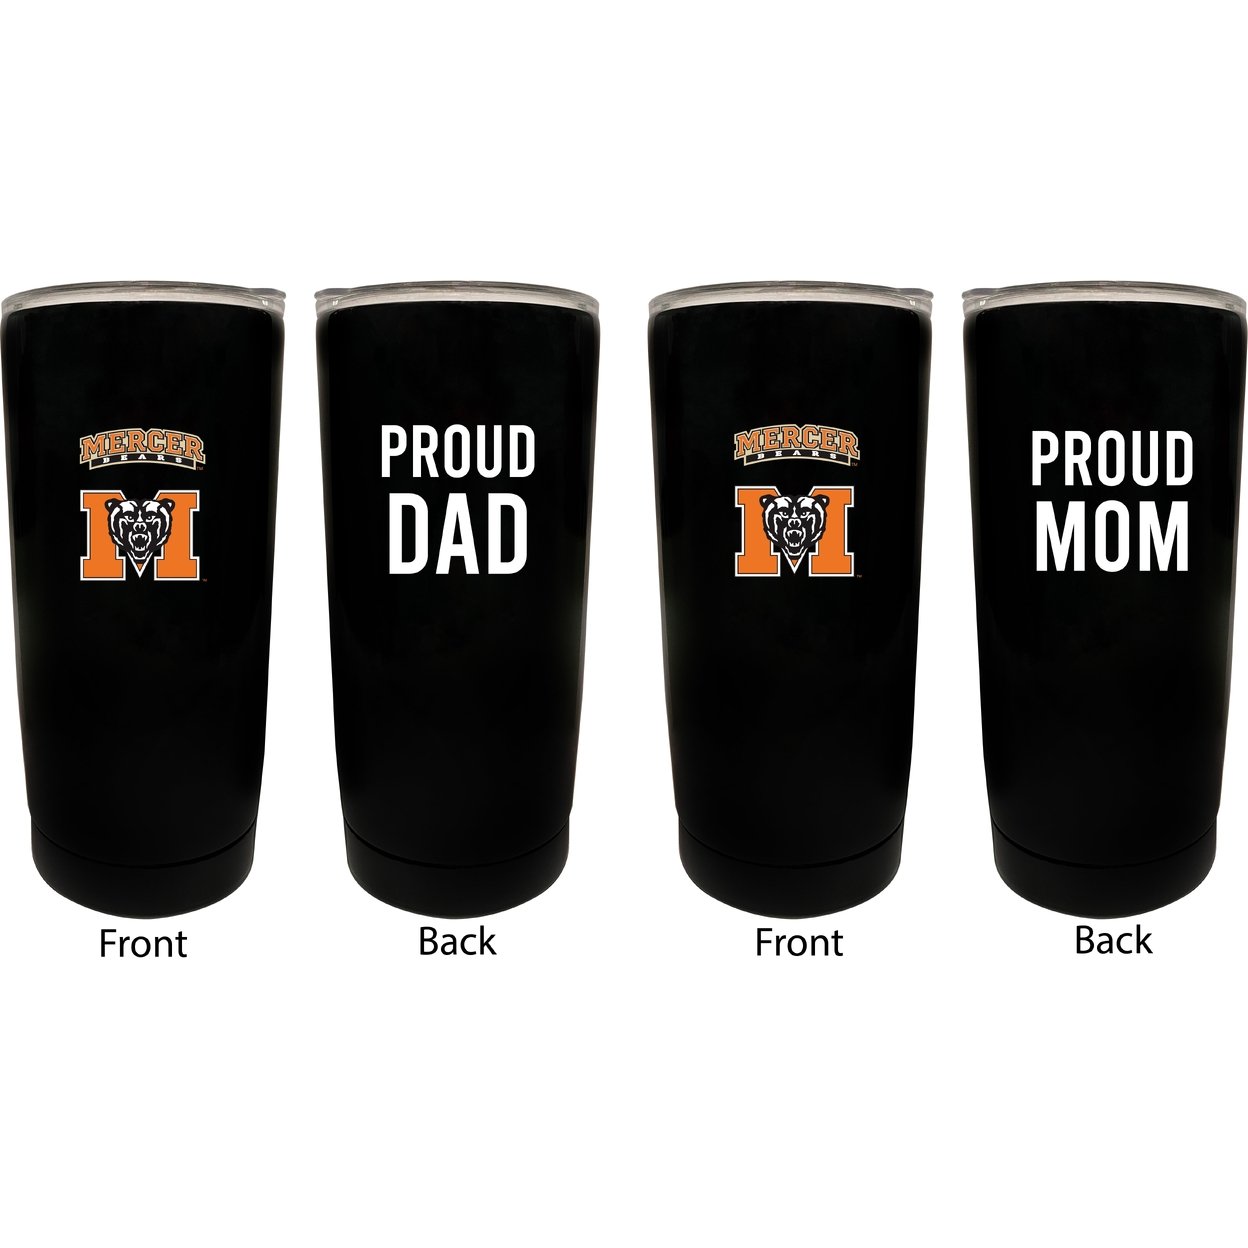 Mercer University Proud Mom And Dad 16 Oz Insulated Stainless Steel Tumblers 2 Pack Black.